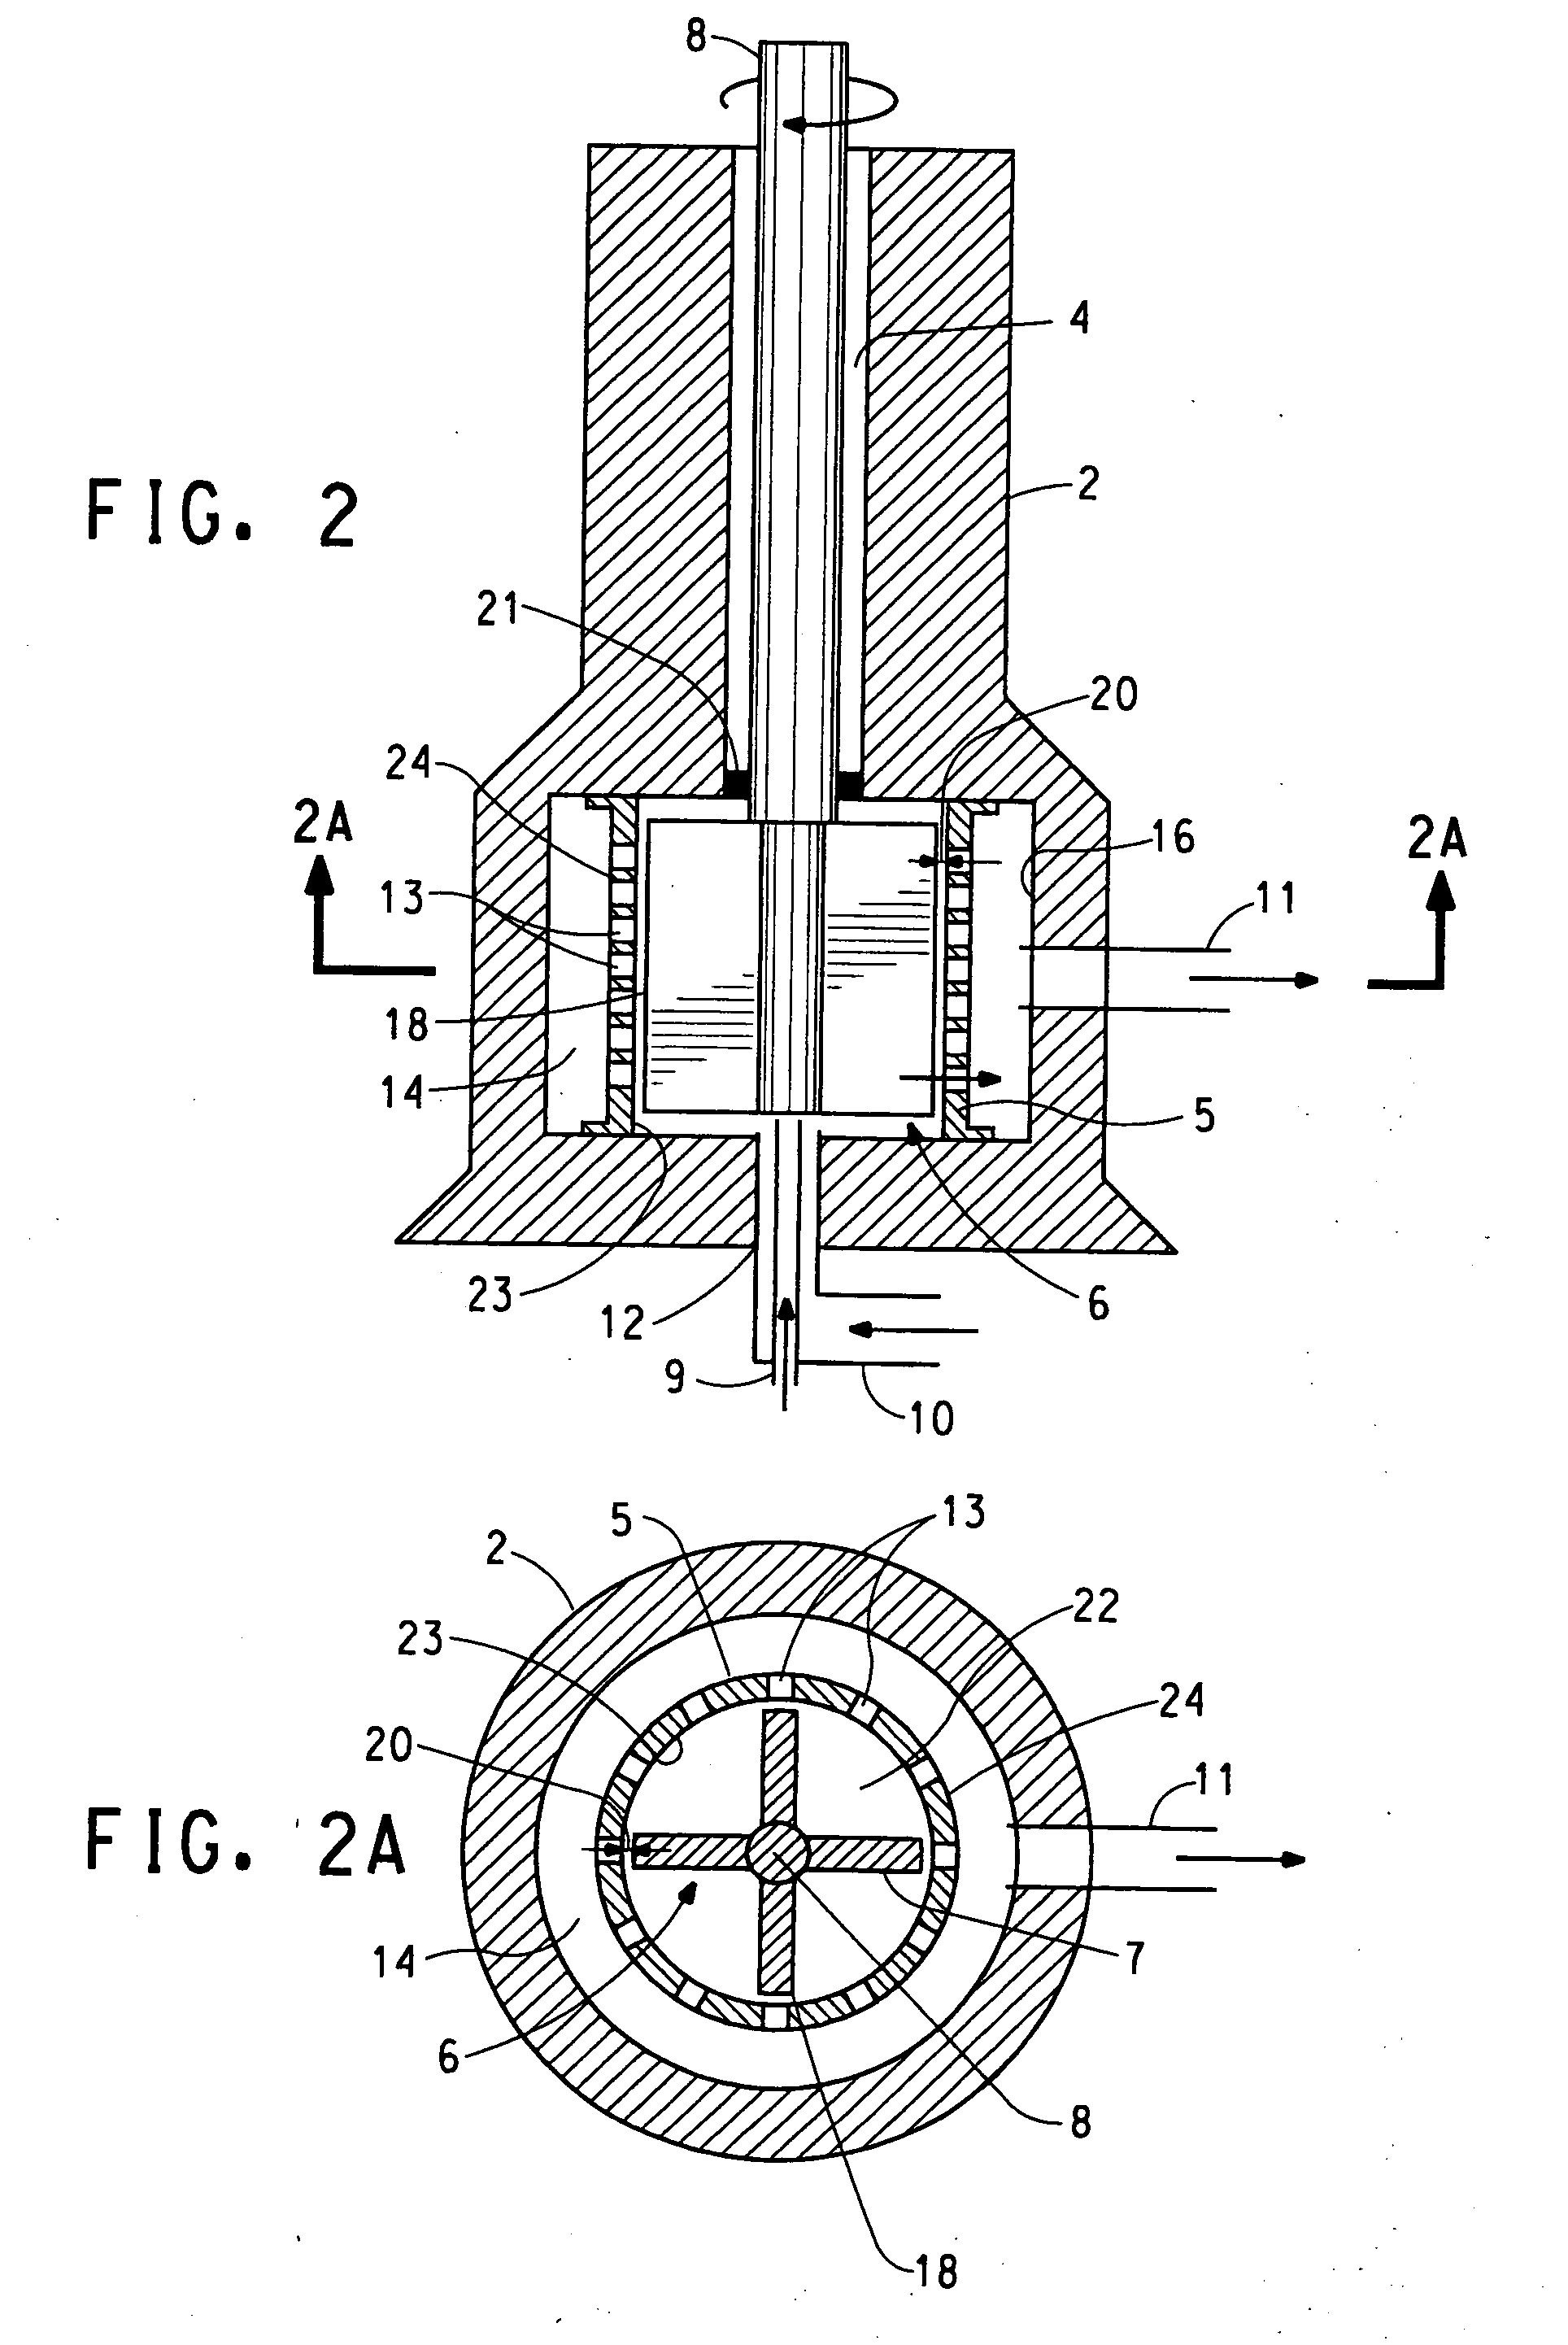 Rotor-stator apparatus and process for the formation of particles